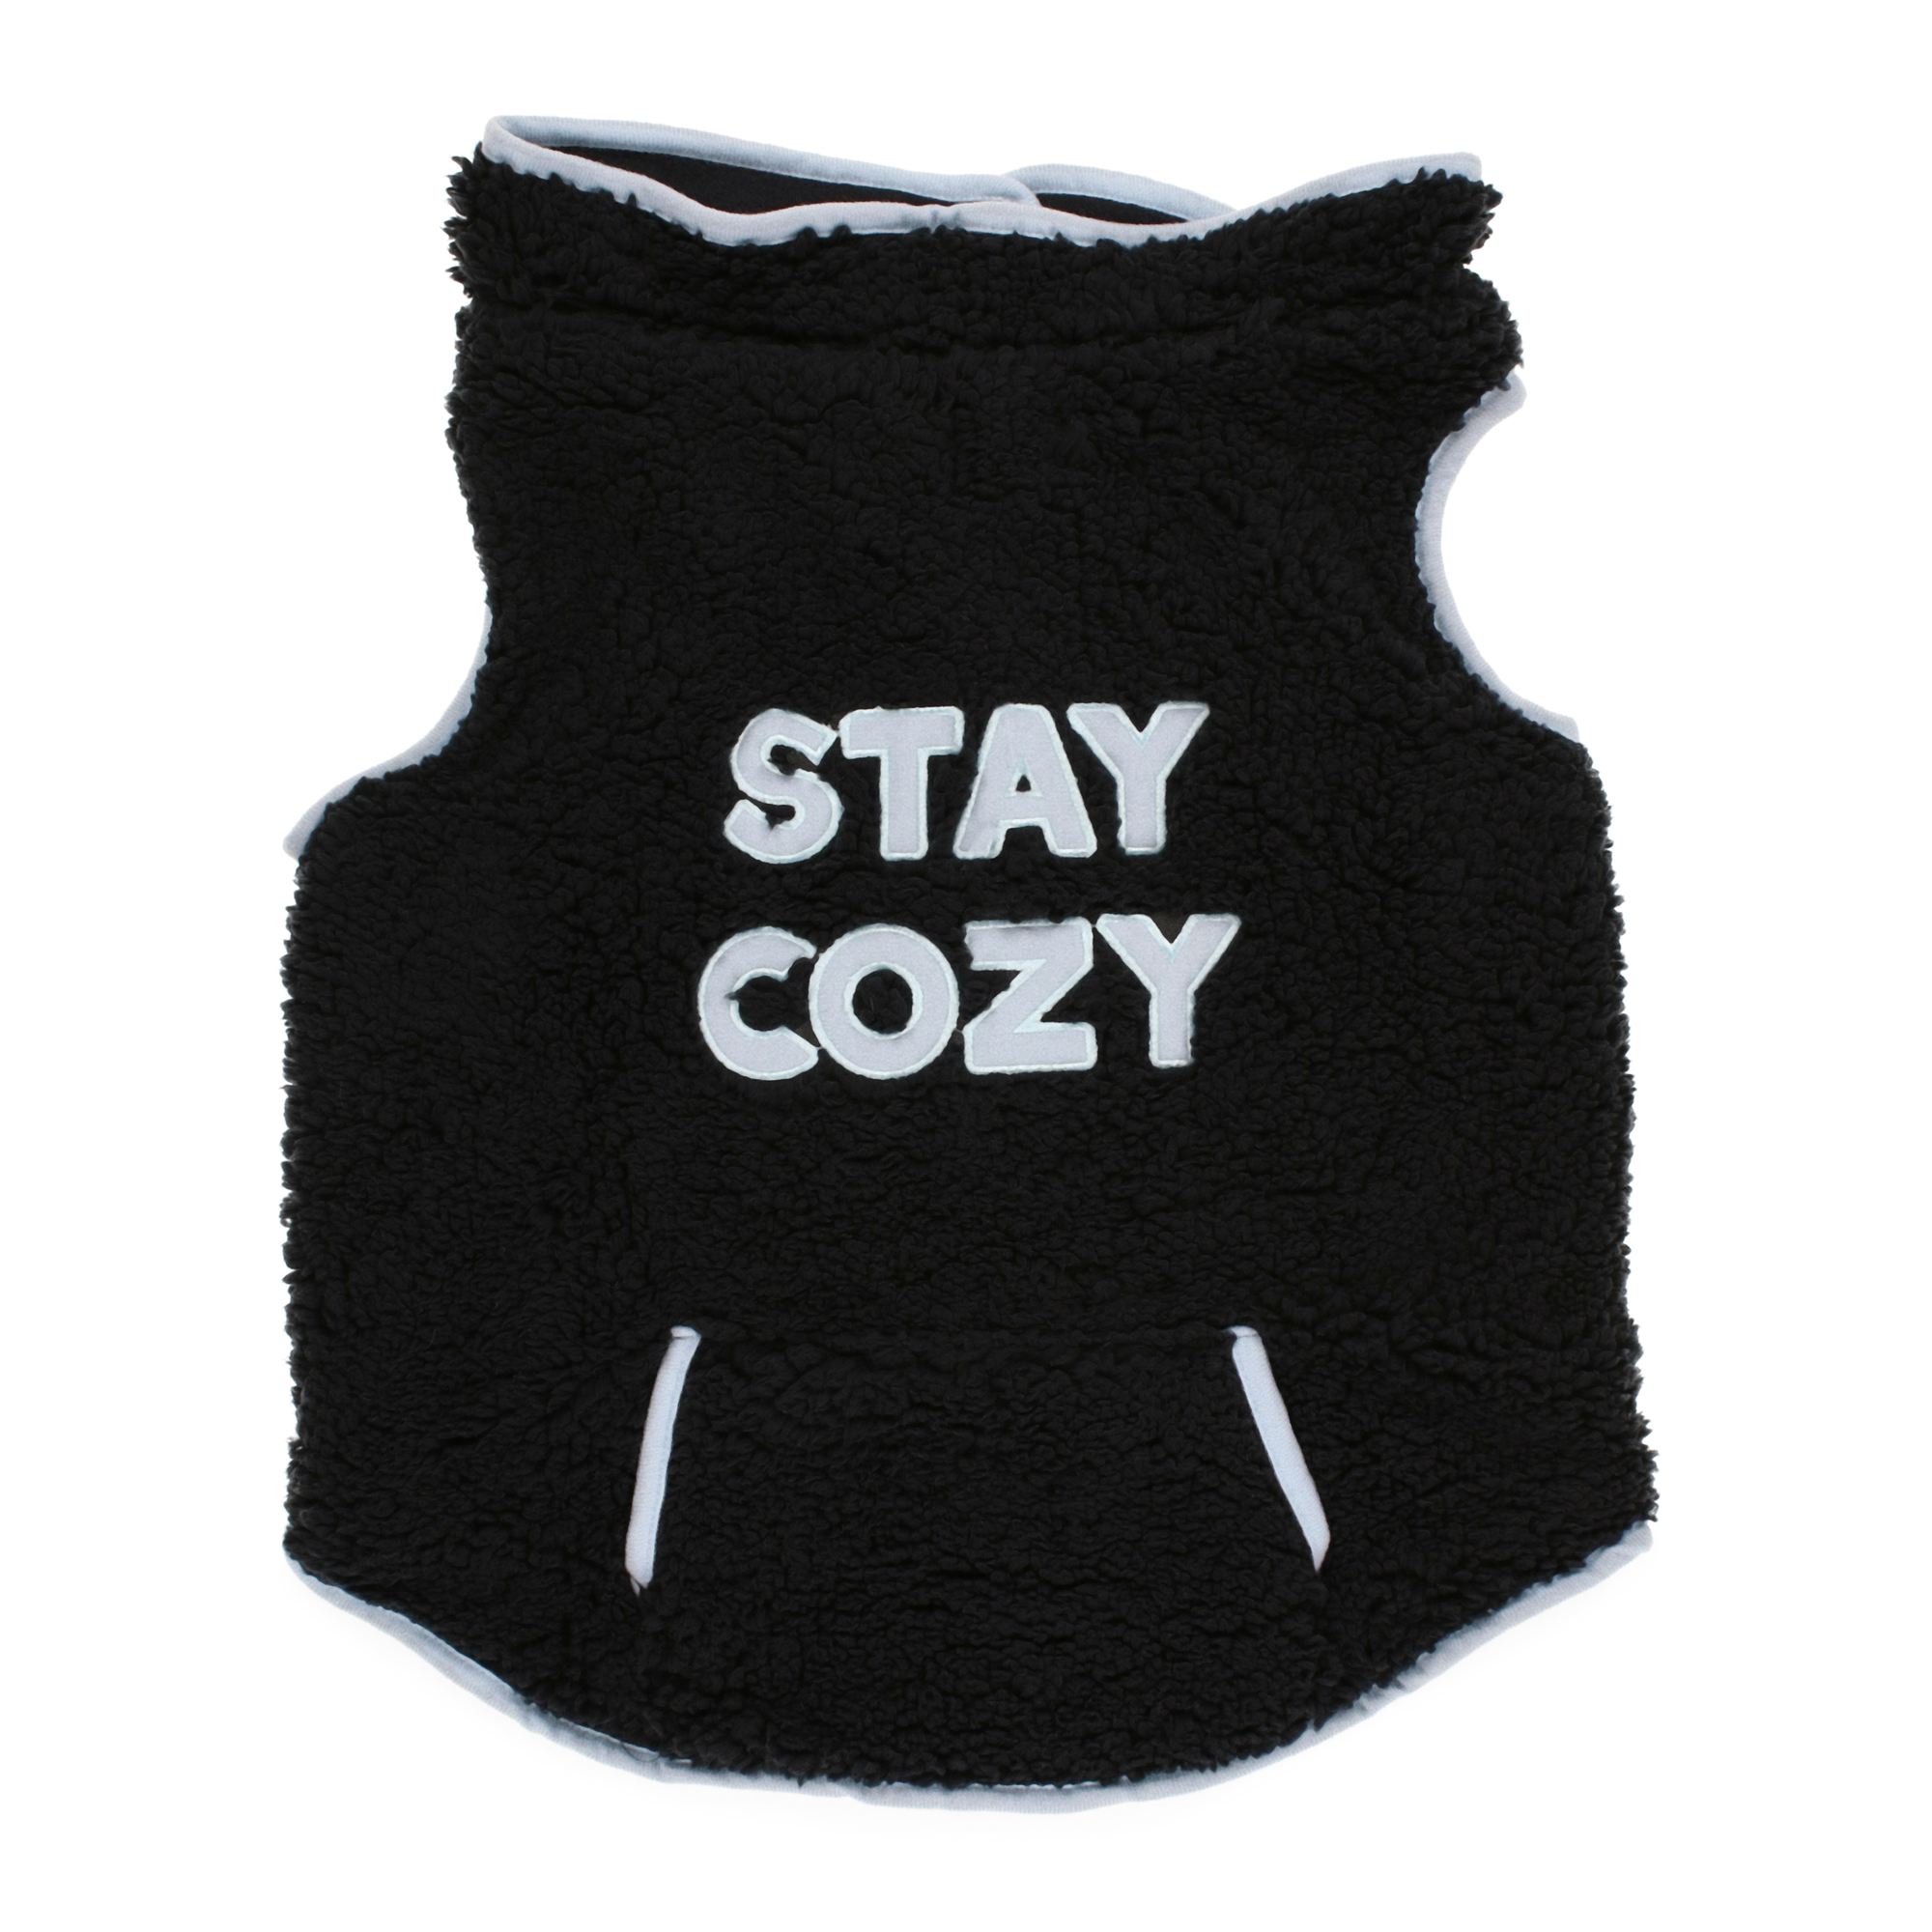 sherpa pet jacket with applique quote